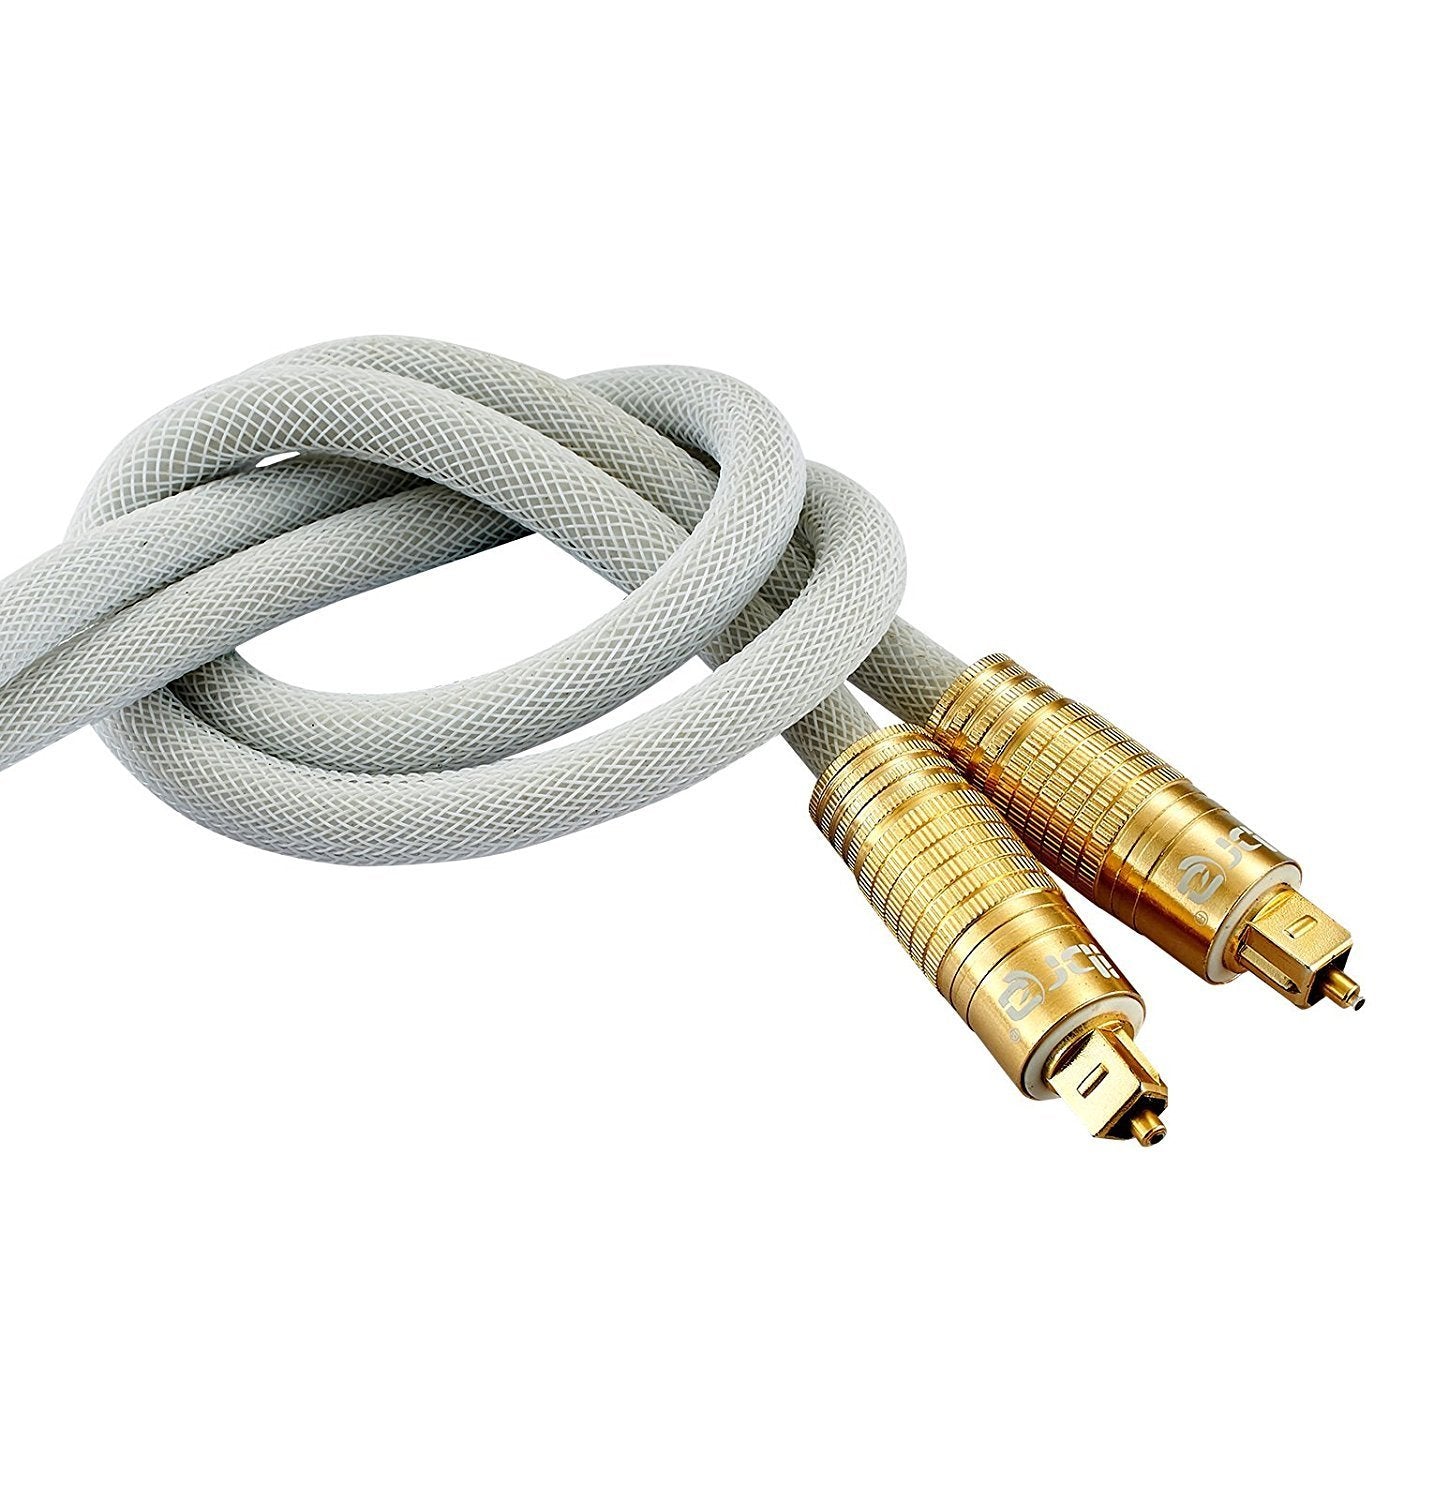 Optical Toslink Digital Audio Cable - 24k Gold Casing - Suitable for PS3,Sky,Sky HD,LCD,LED,Plasma, Blu Ray to Connect with Home Cinema Systems,AV Amps - 1.5M - IBRA PREMIUM WHITE